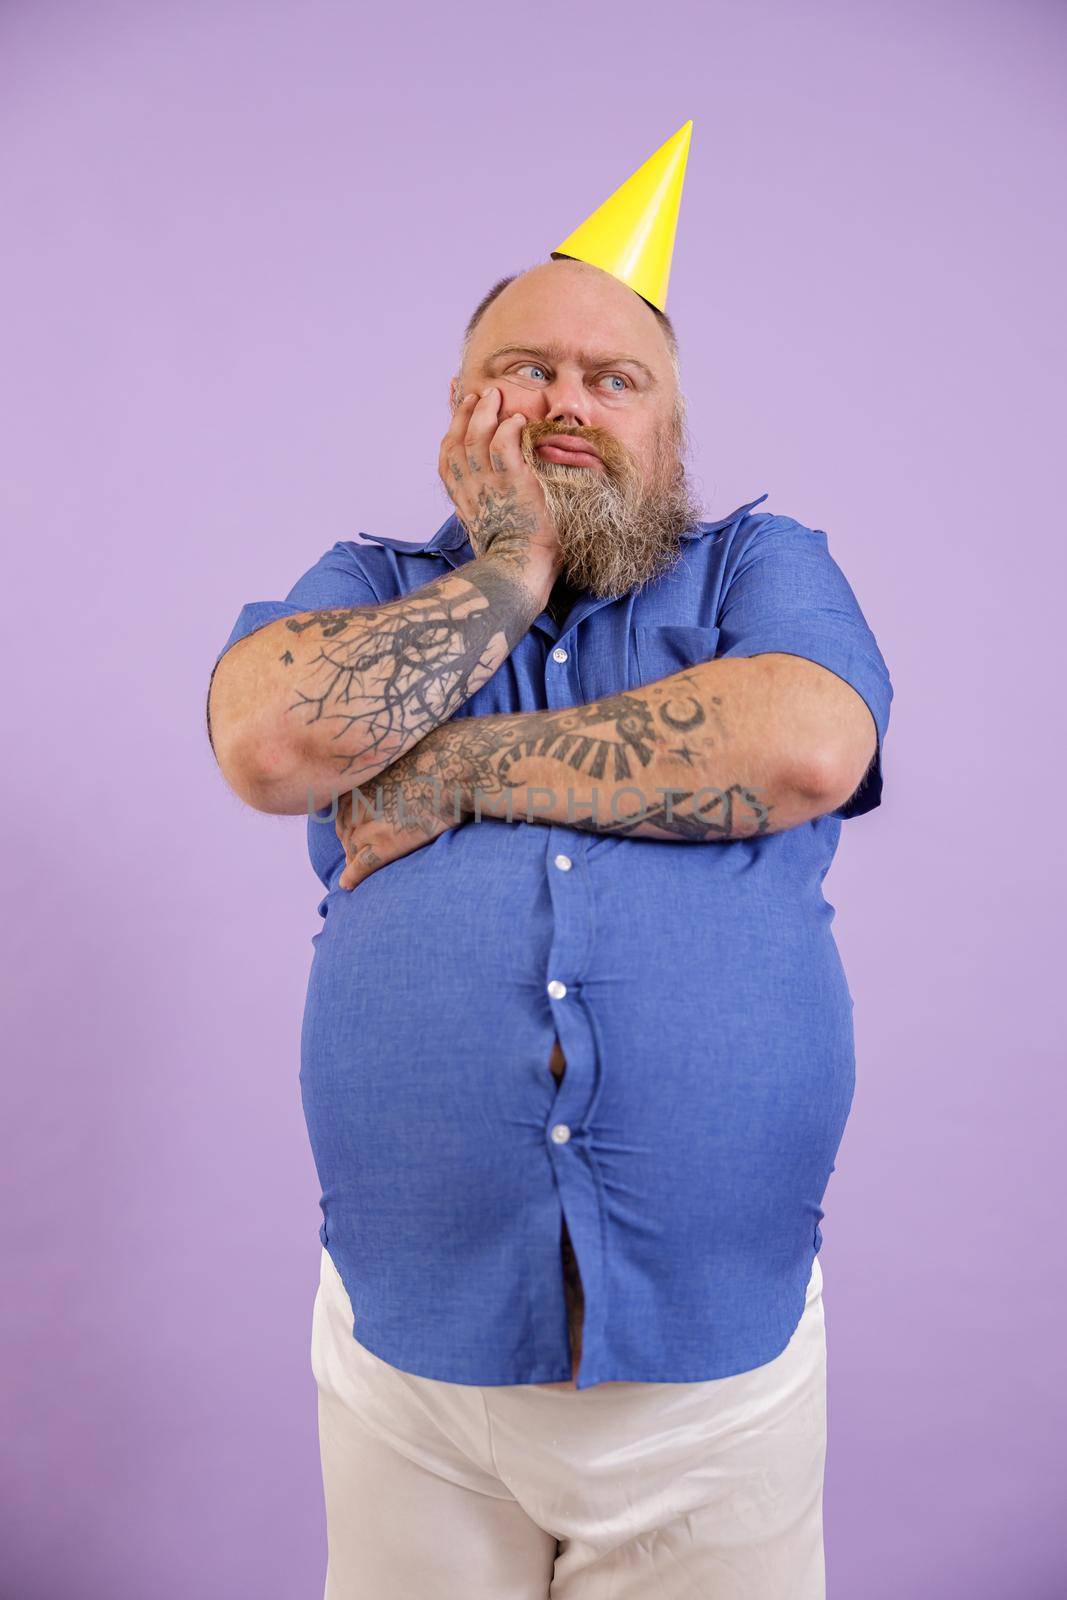 Bored middle aged man with overweight in tight blue shirt and party hat leans onto palm on purple background in studio